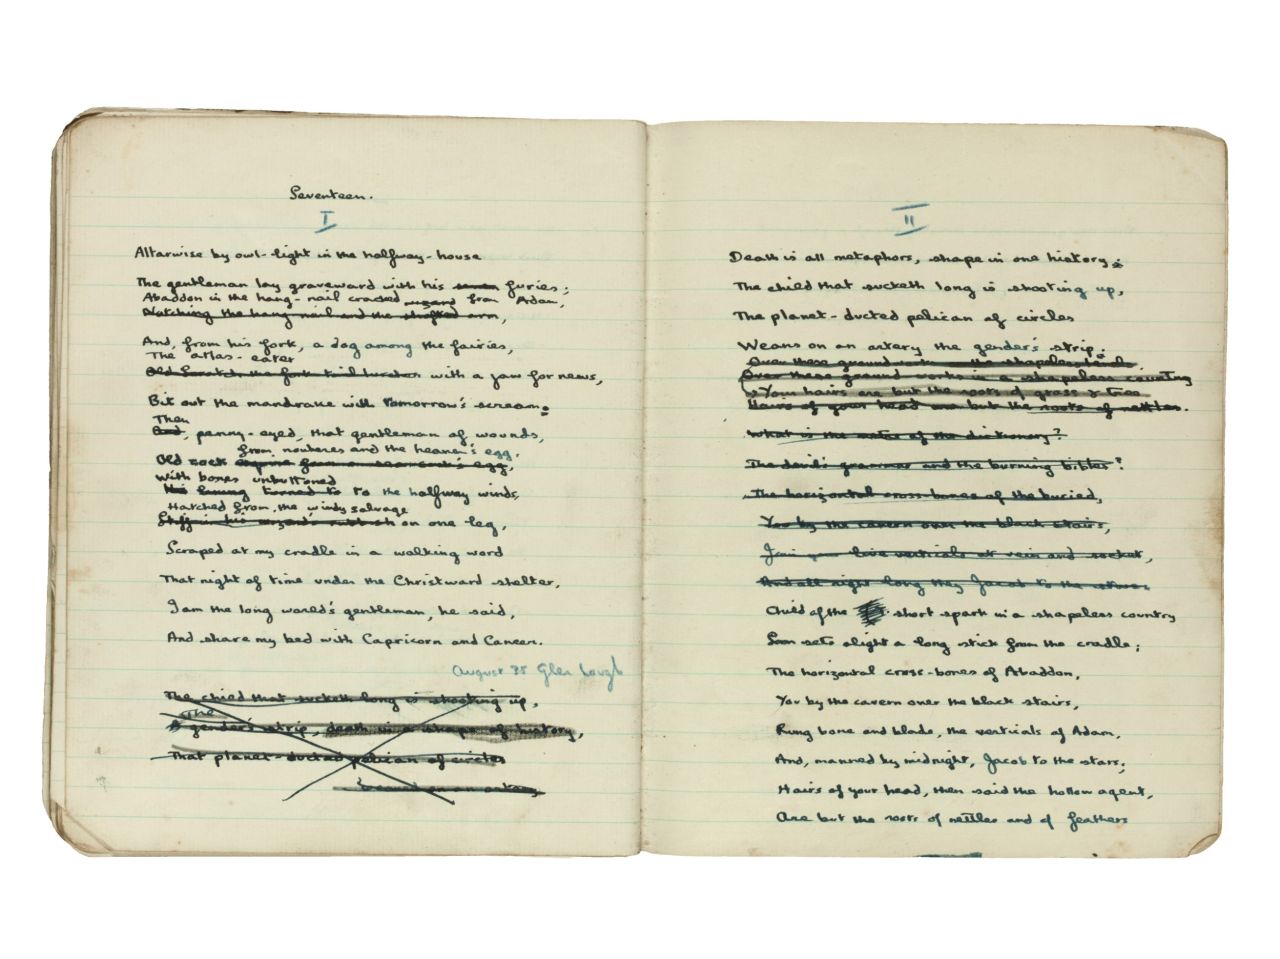 A long-lost notebook once owned by Dylan Thomas which includes drafts of some of his key poems has been rediscovered and put up for sale at <a href="http://www.sothebys.com/" target="_blank" target="_blank">Sotheby's auction house</a> in London.